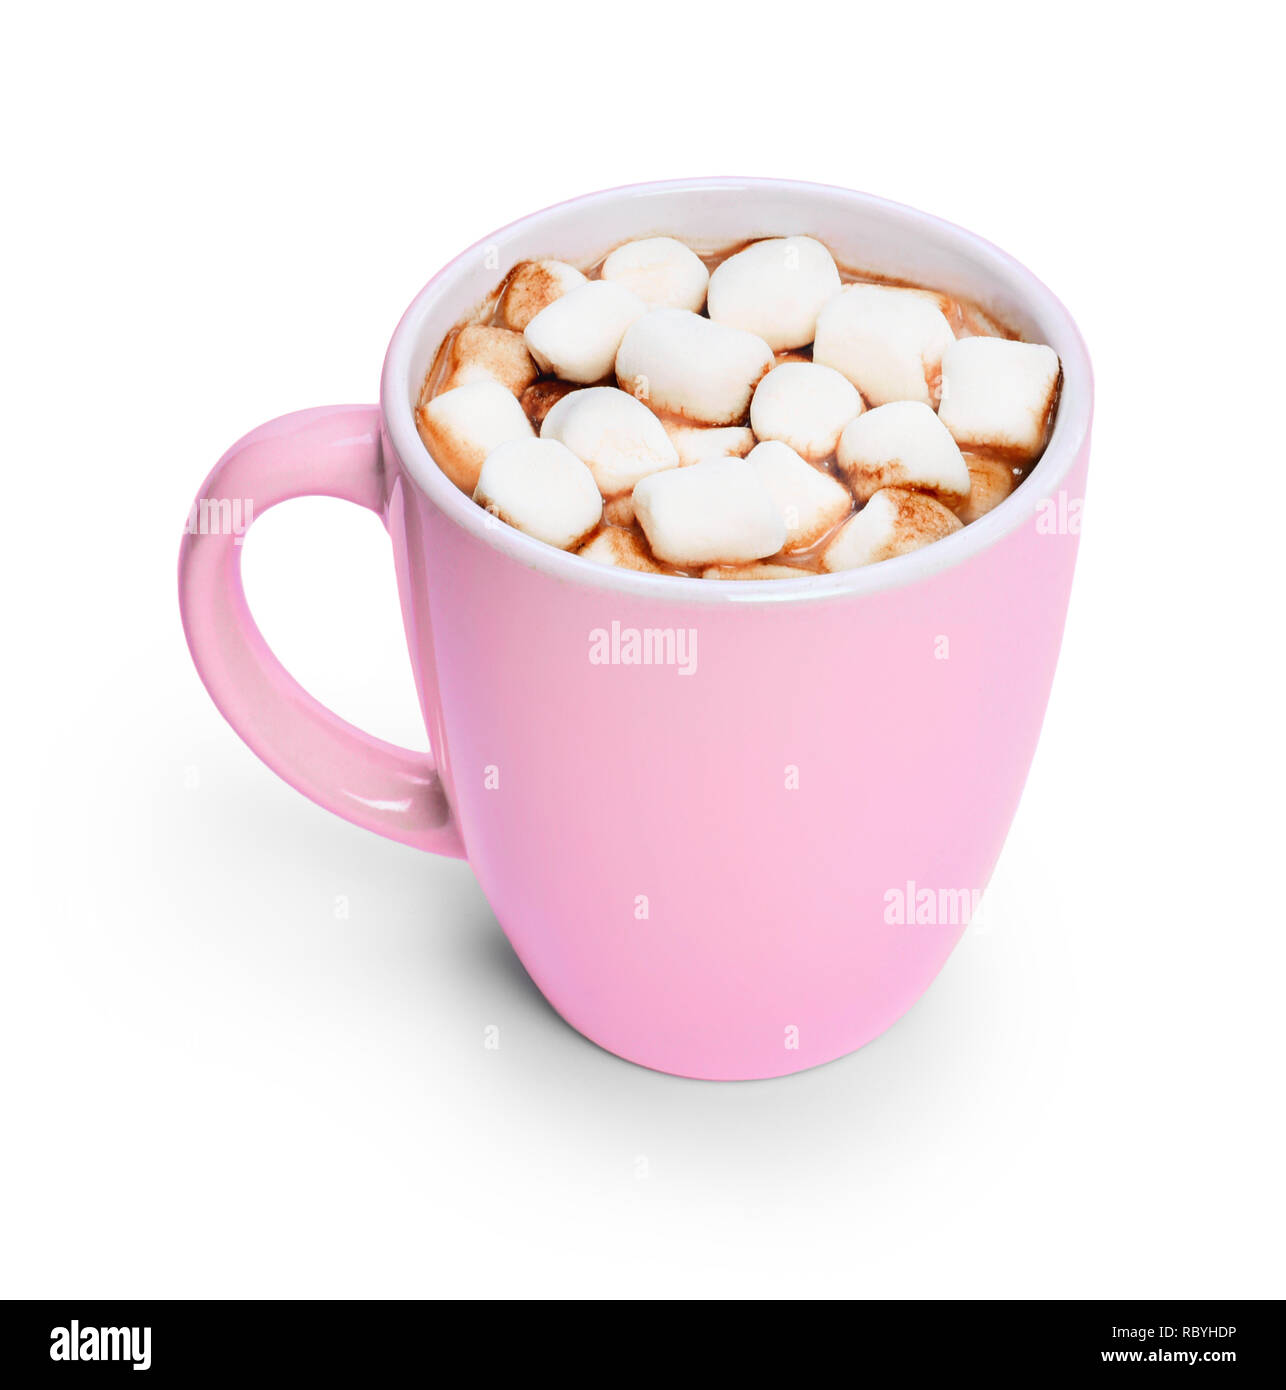 Hot chocolate or cocoa drink in a cup or mug. Top view of hot chocolate with marshmallows, isolated on white background. Stock Photo